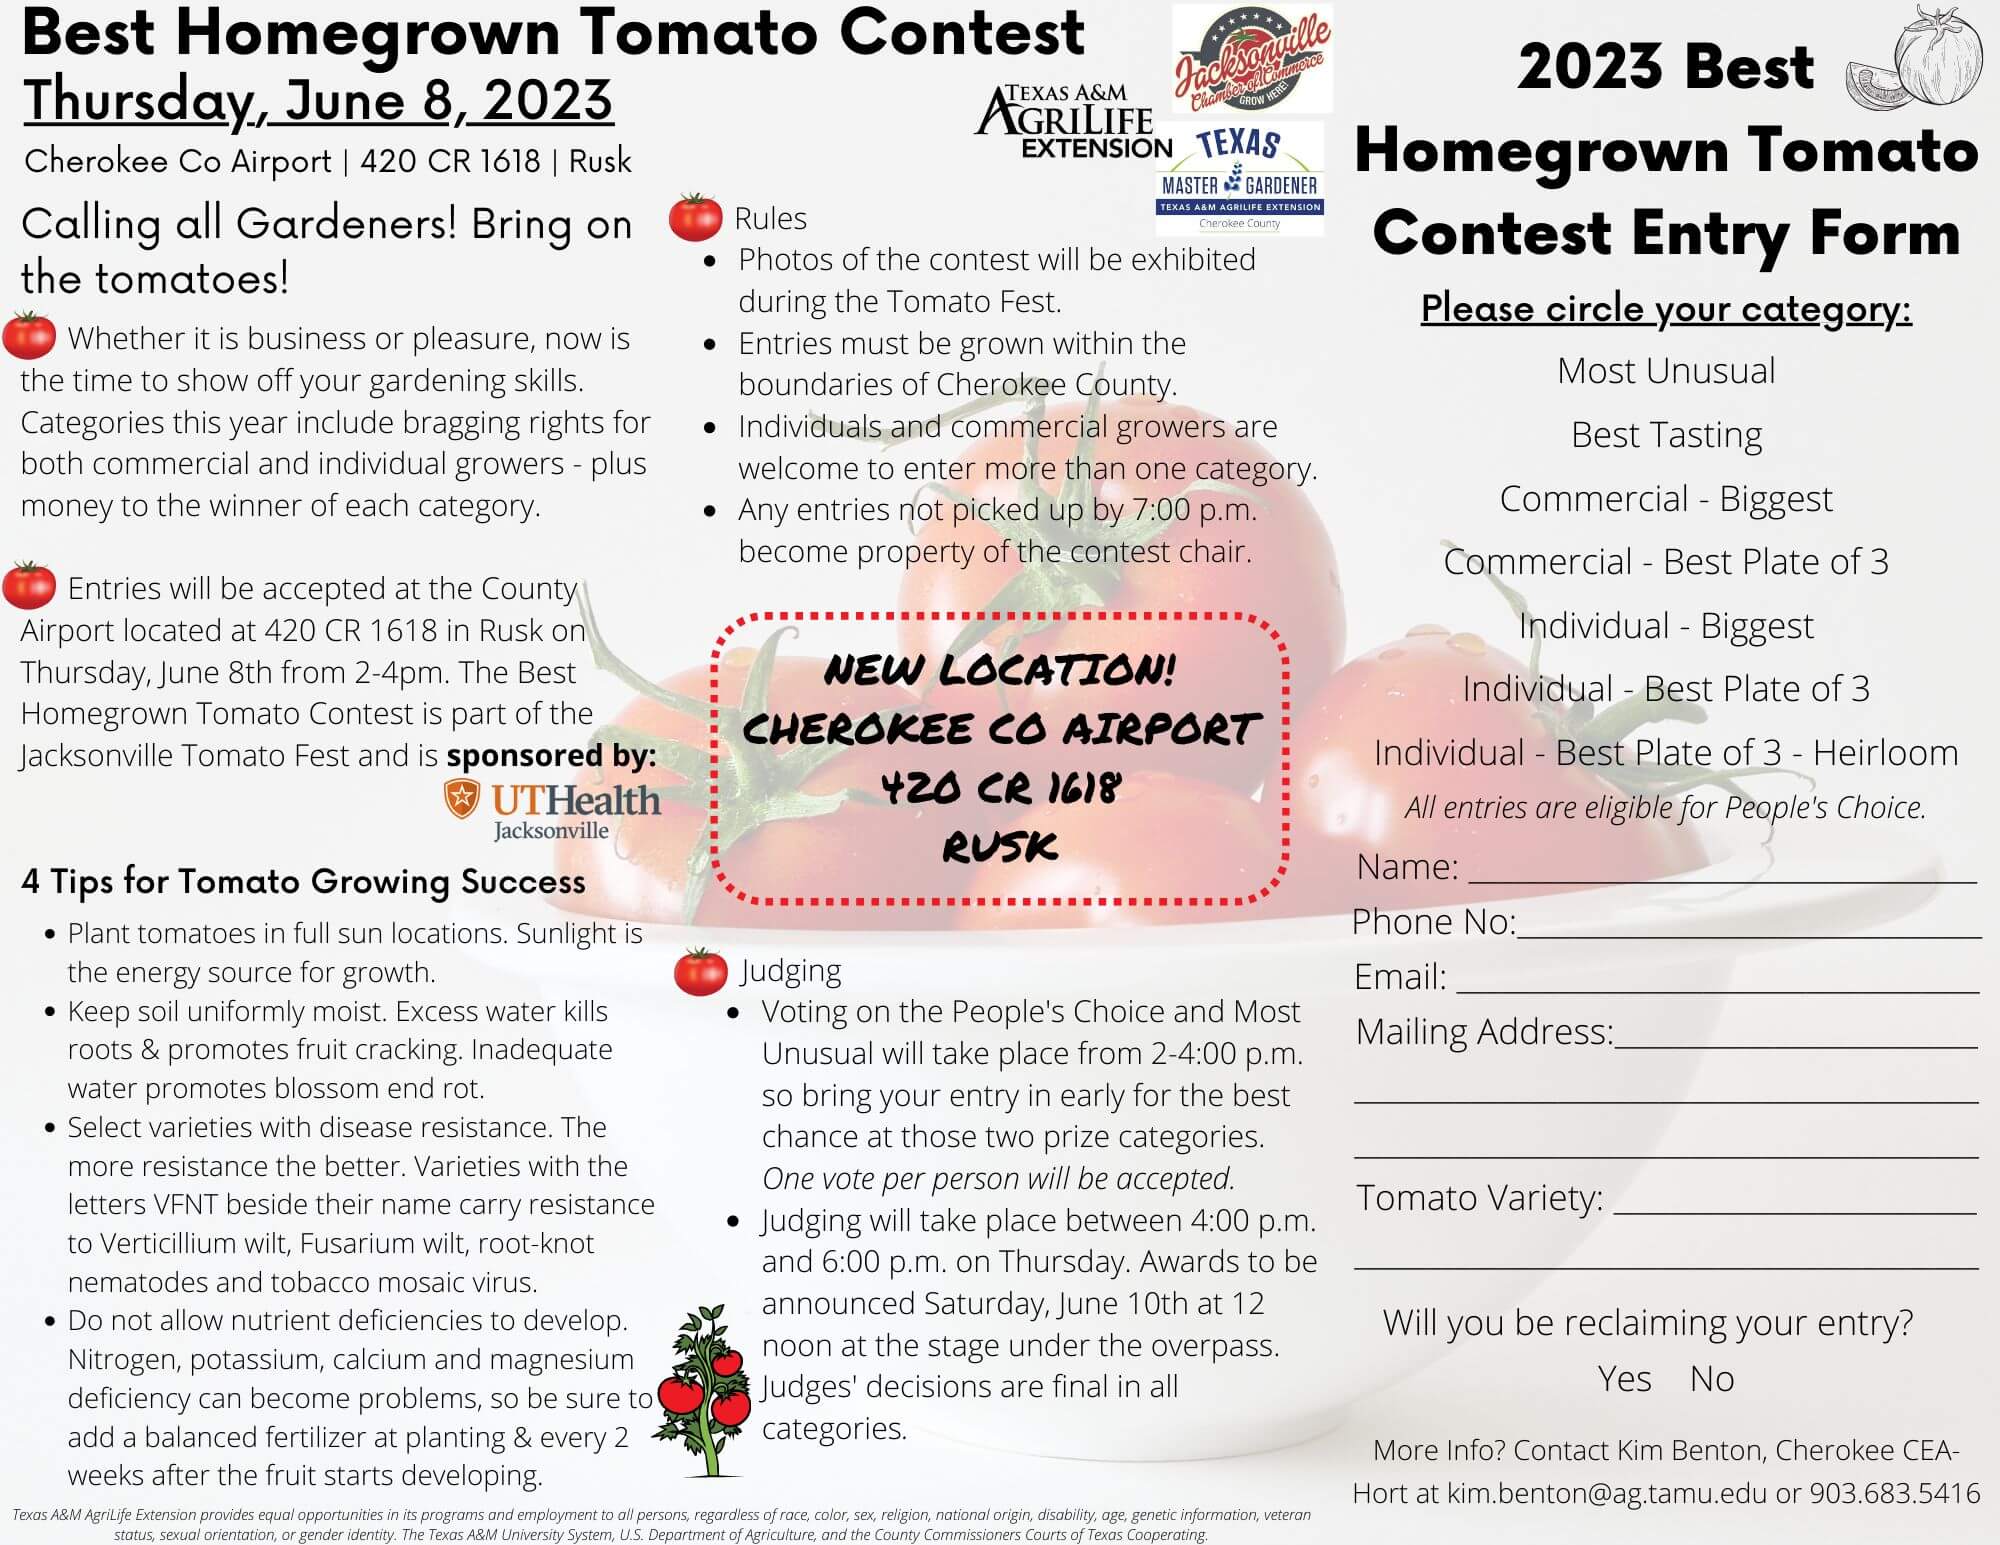 2023 Best Homegrown Tomato Contest Info and Entry Form (1) (002)